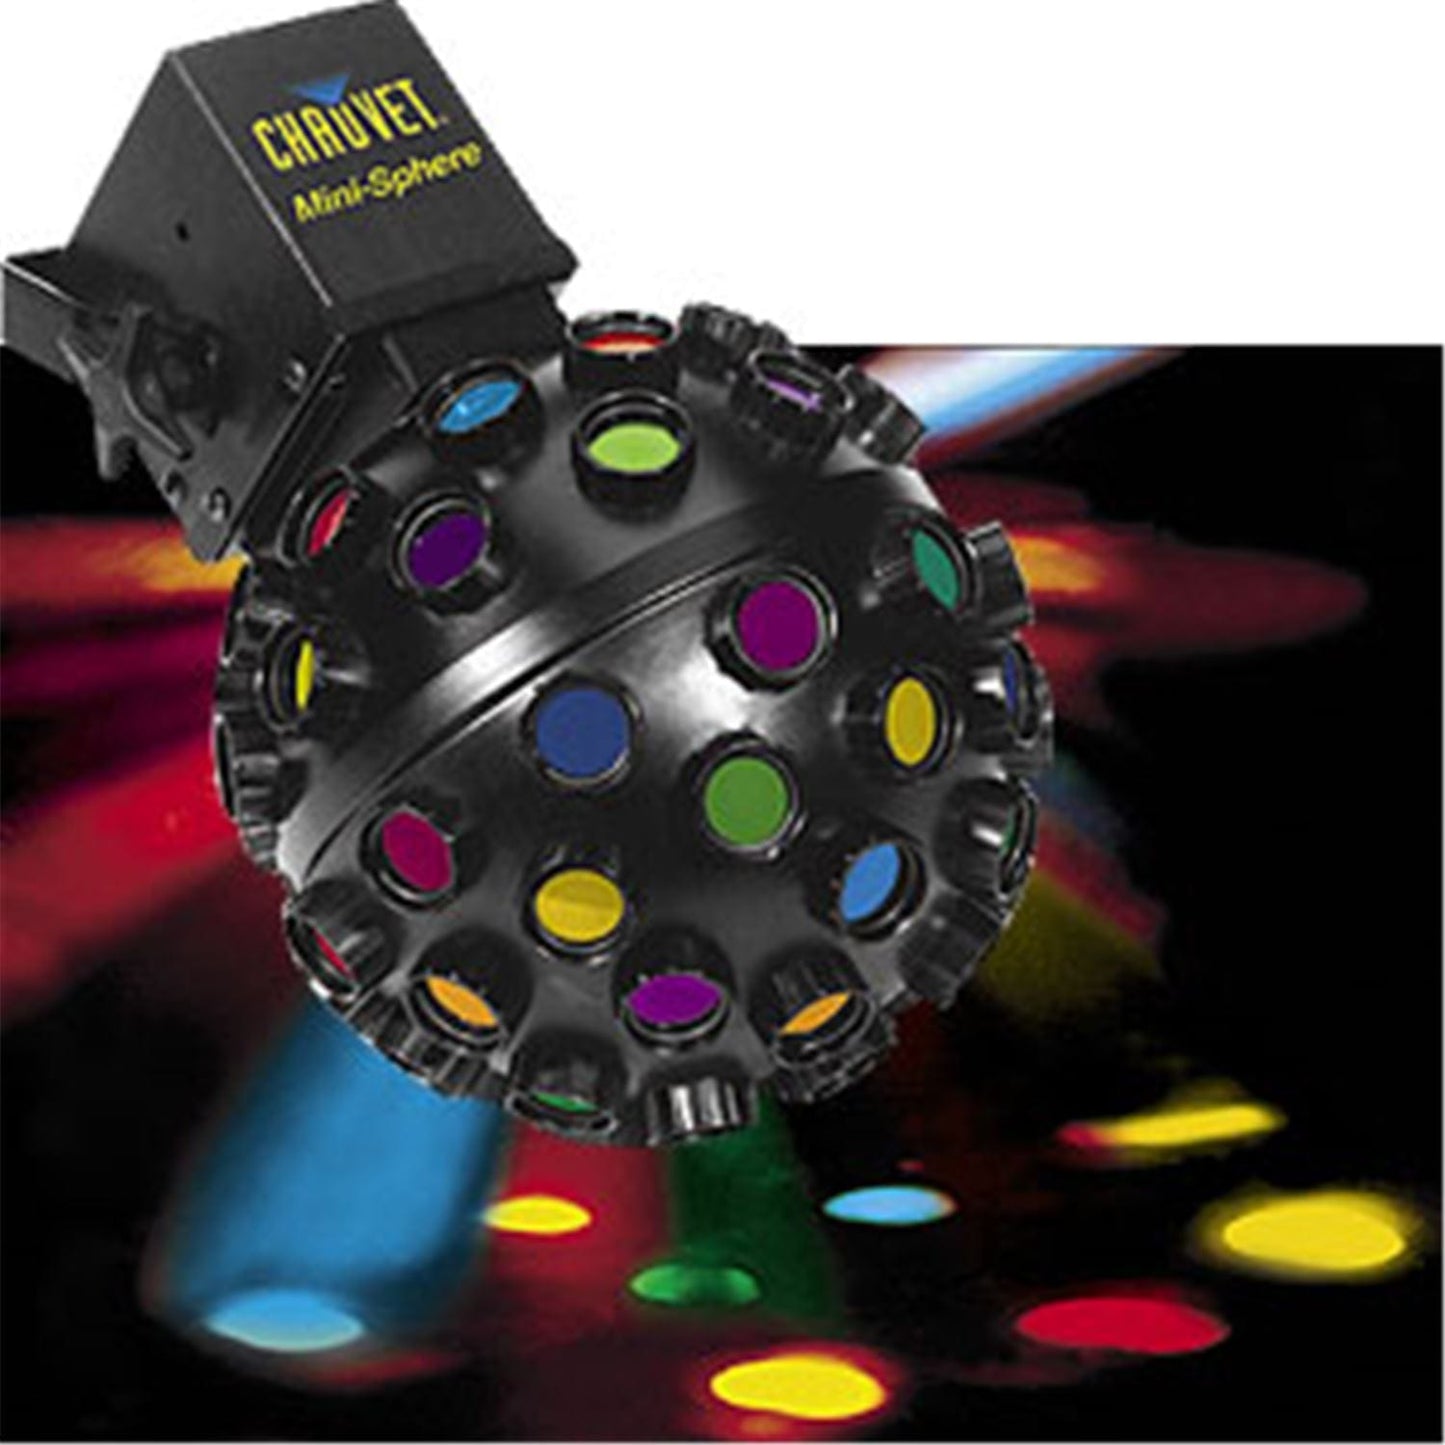 Chauvet MINI-SPHERE Effects Light -64514 - ProSound and Stage Lighting